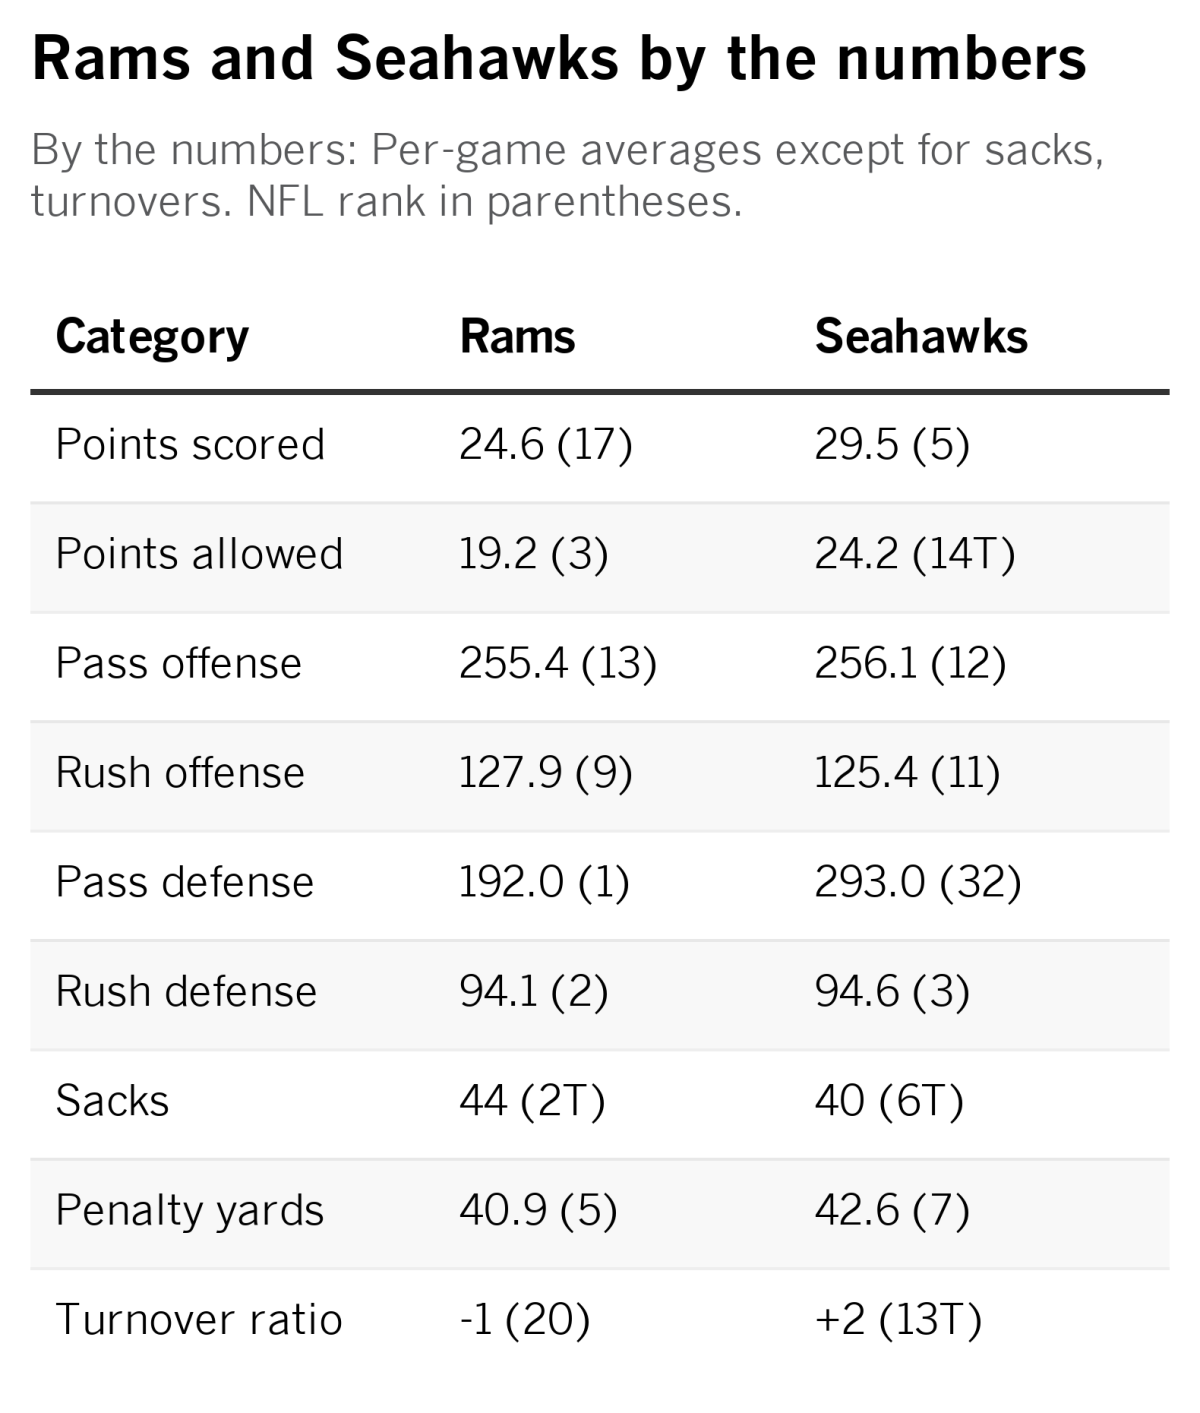 Rams and Seahawks numbers.